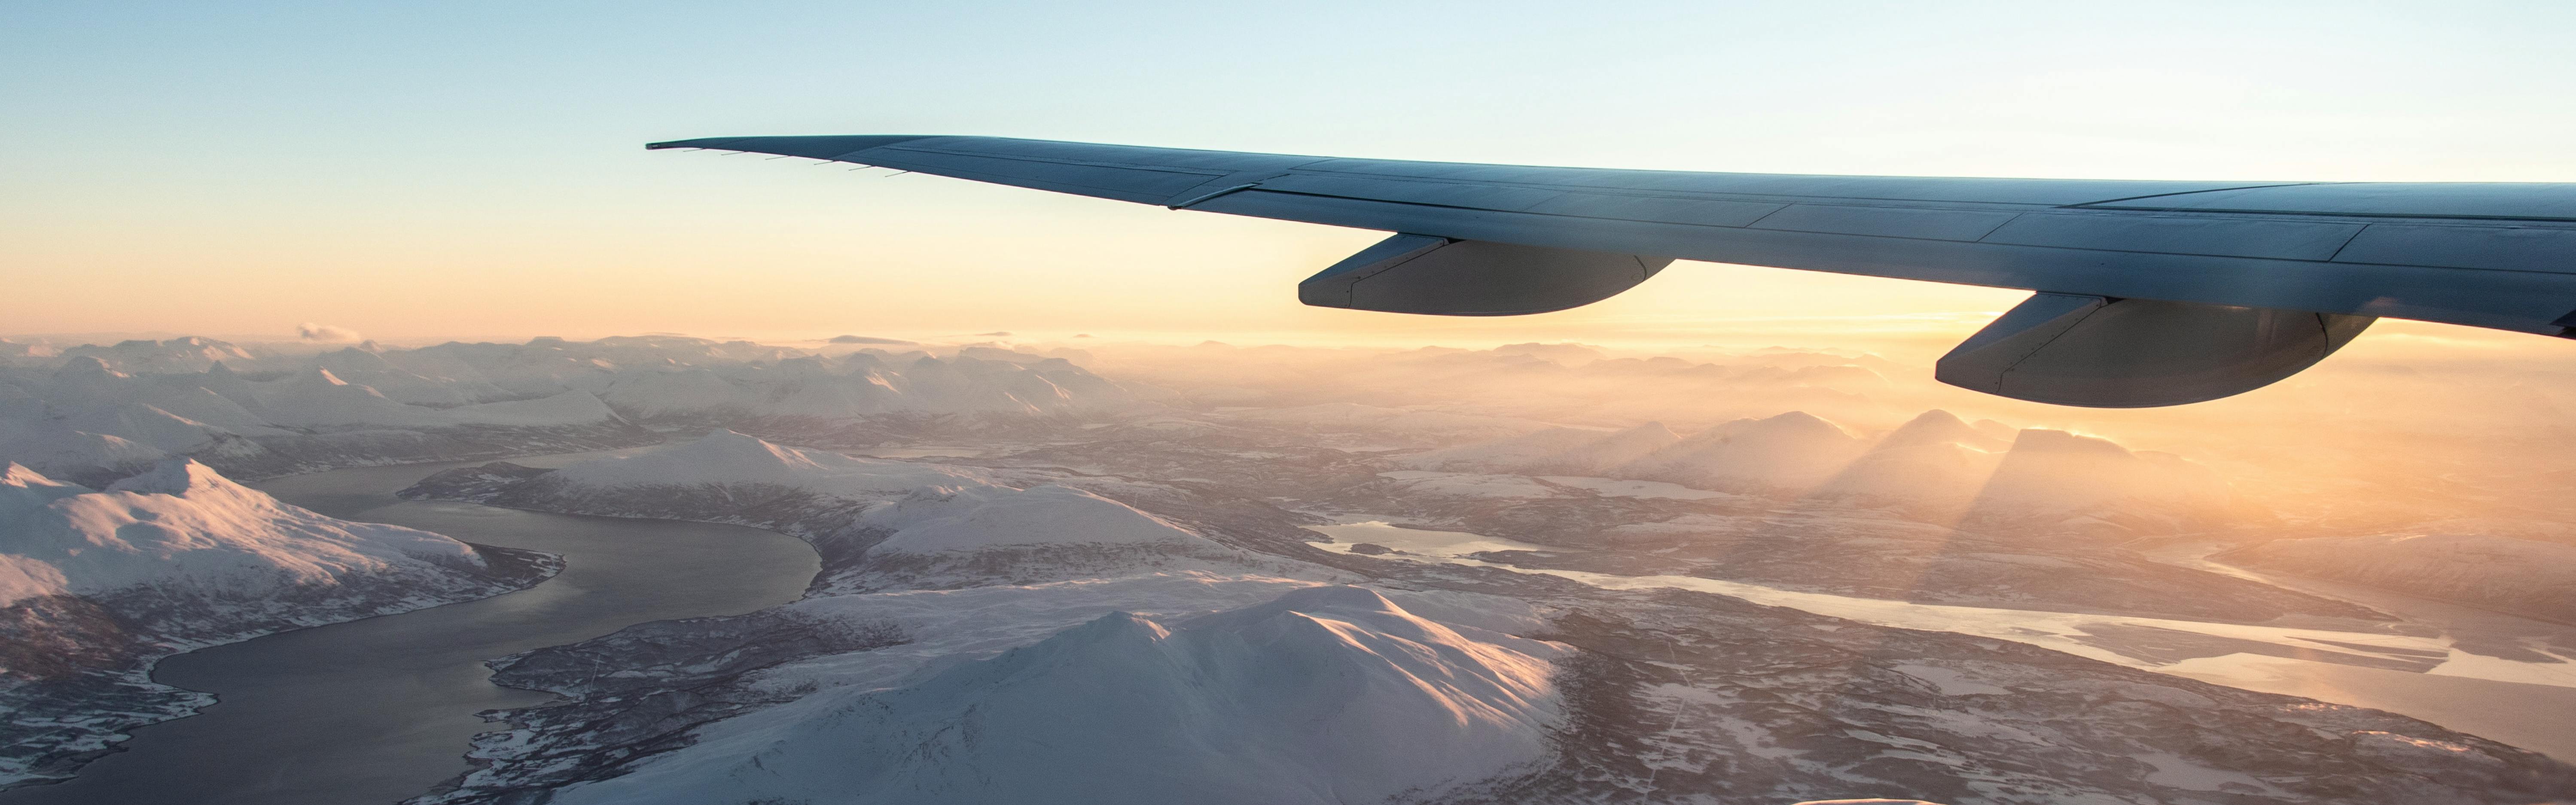 Someone looks at the wing of an airplane through the window. The sun is setting on a snowy landscape on the ground below. 